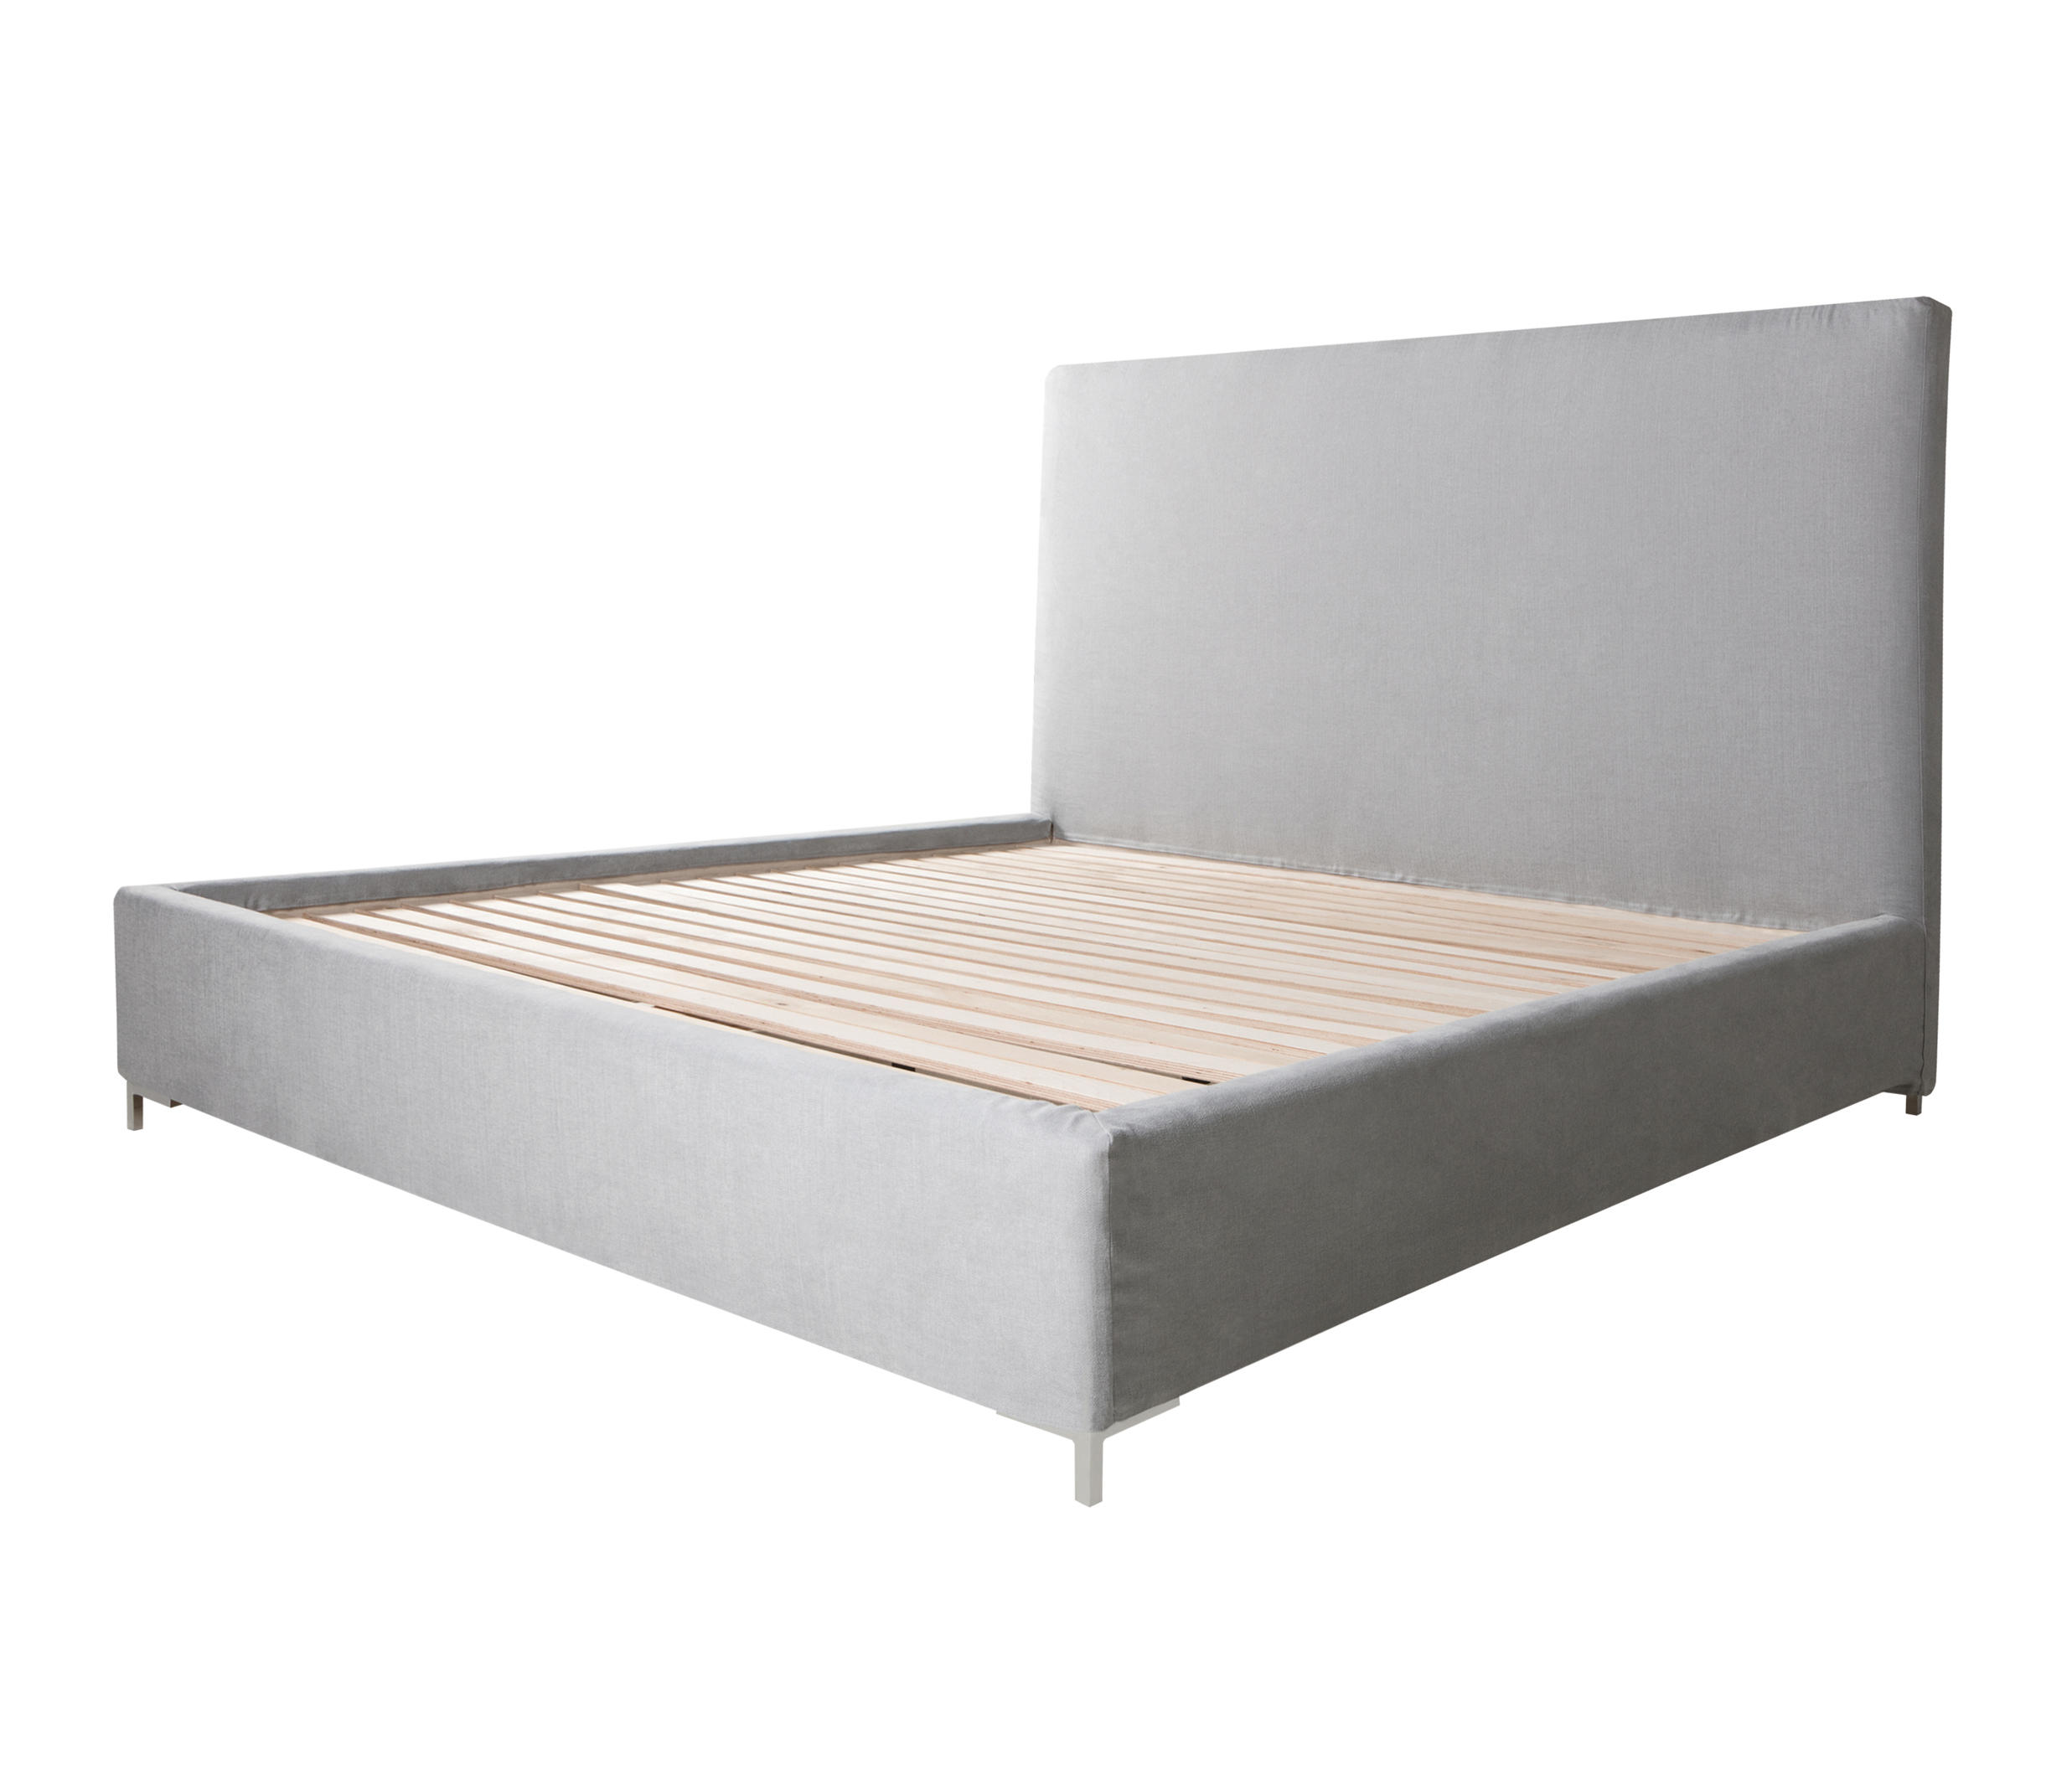 Luna Beds From Sits Architonic